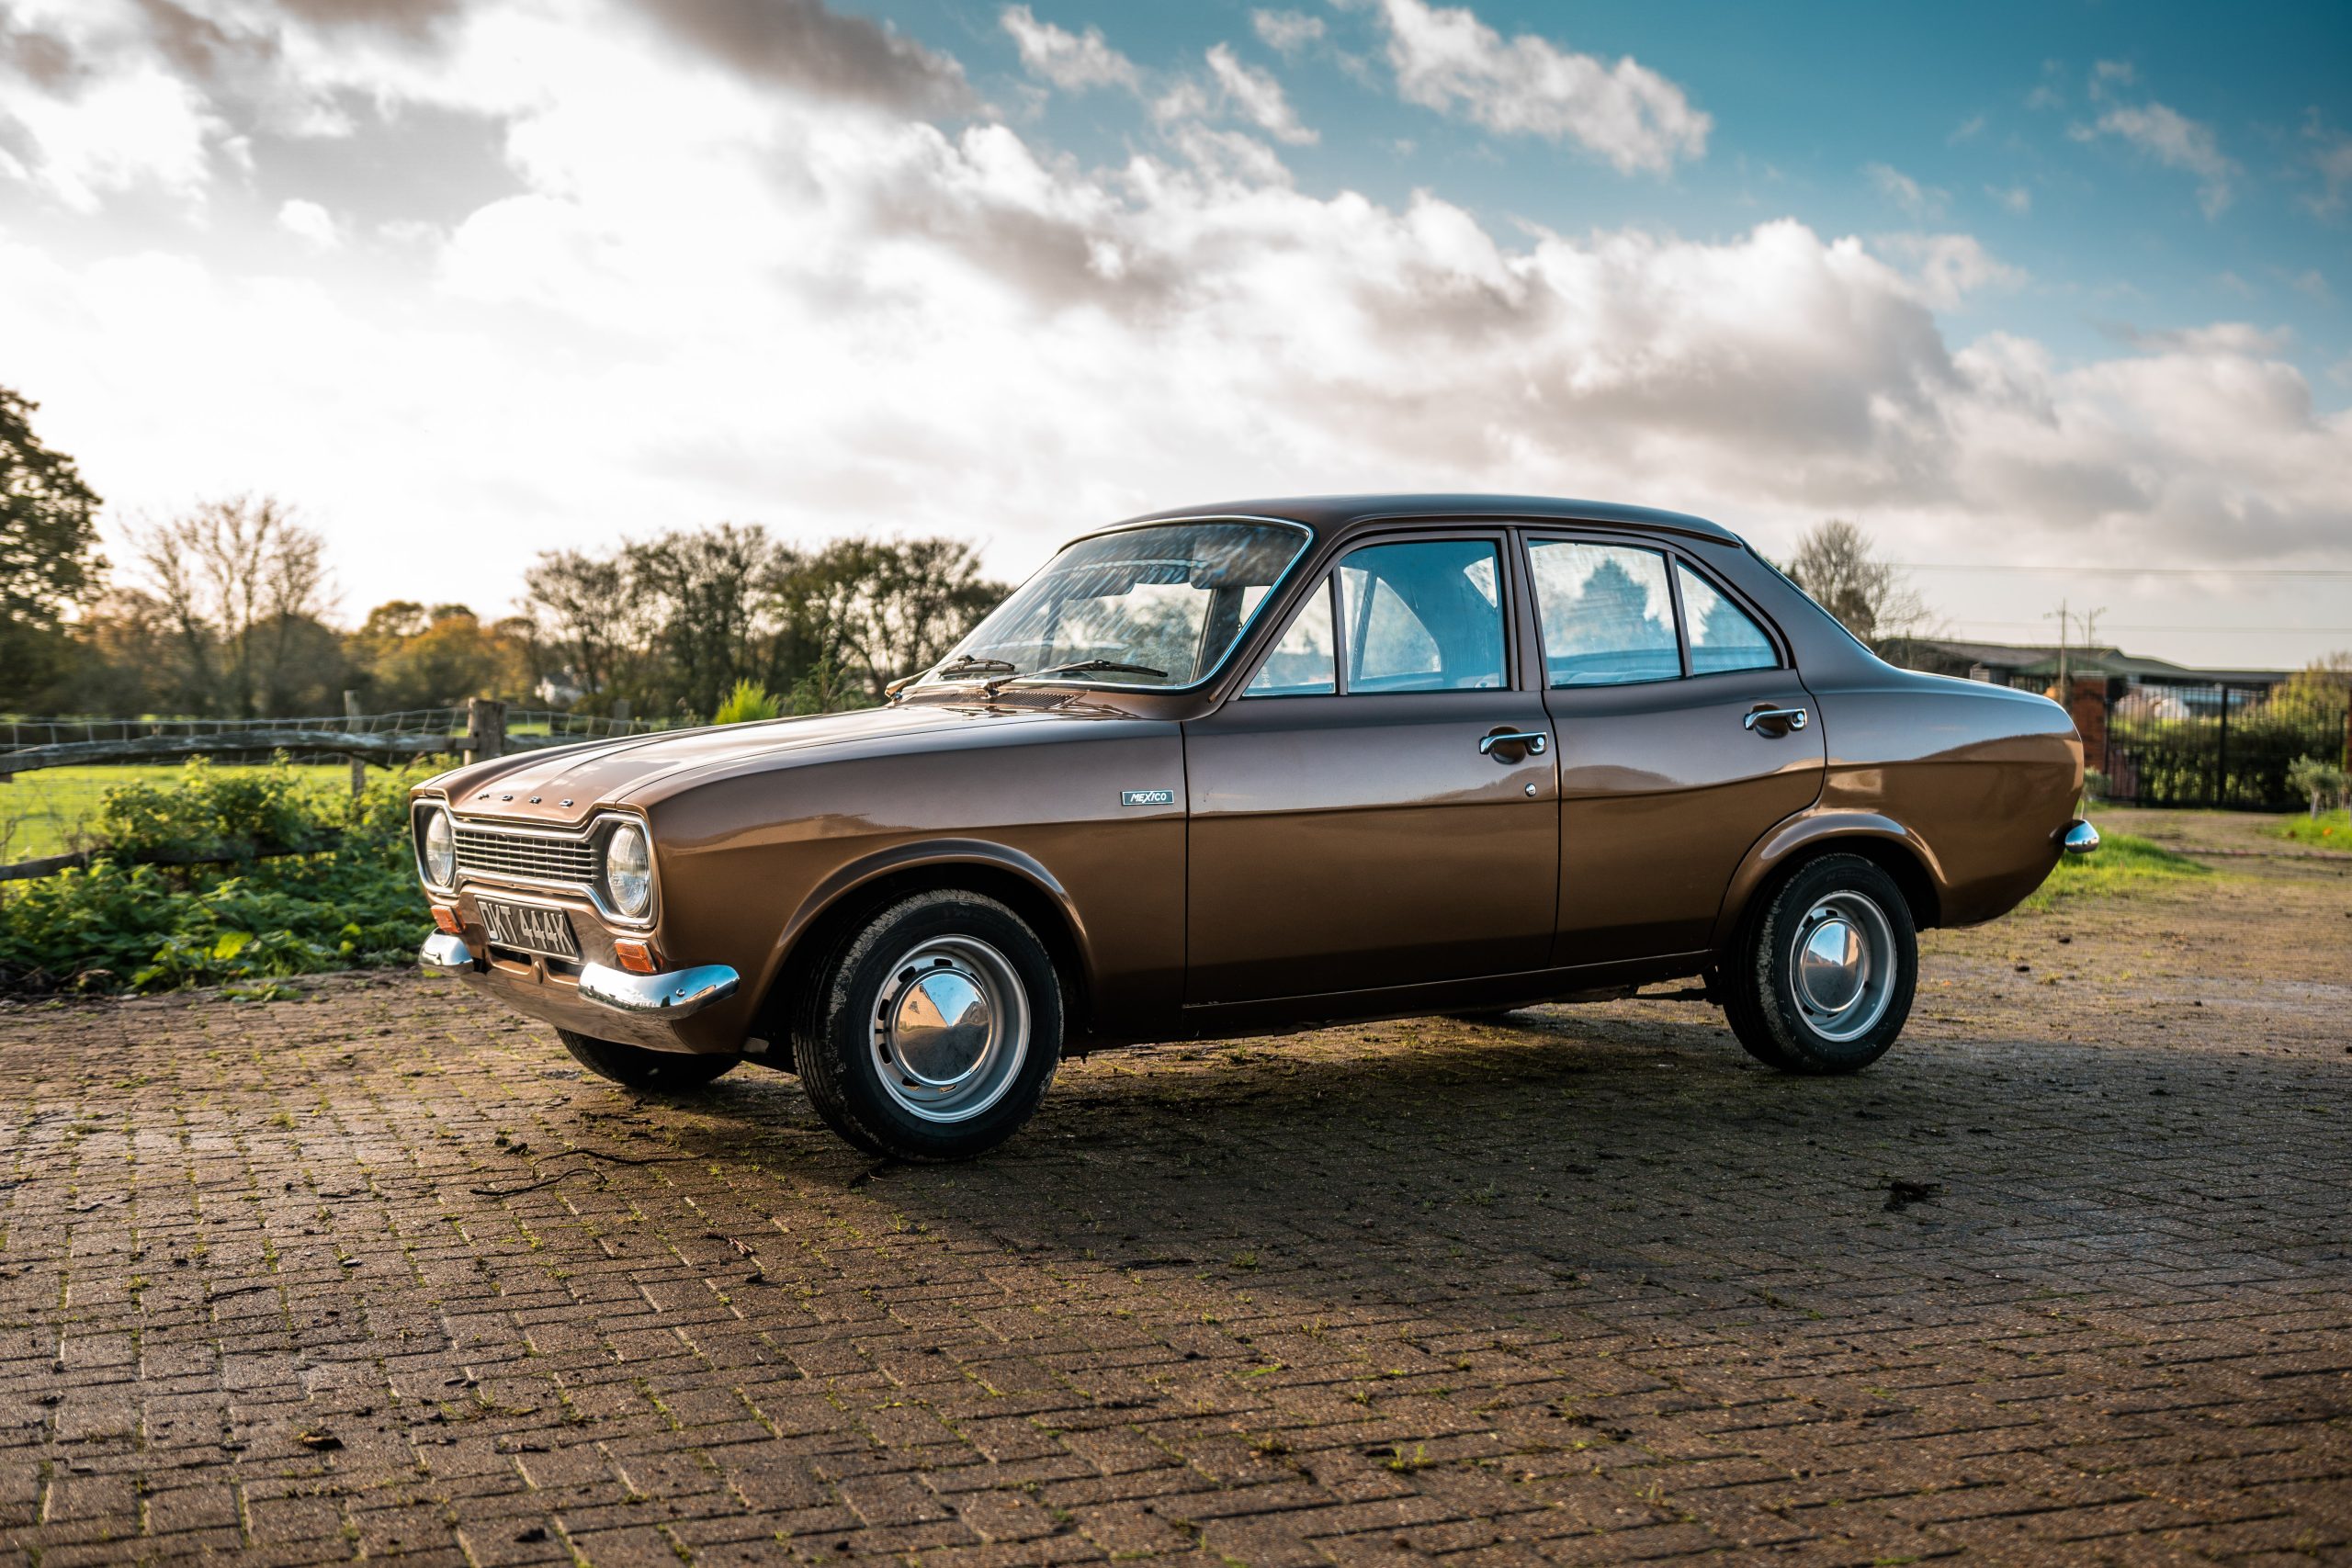 Rare Ford Escort Mexico four-door prototype sells for £32,000